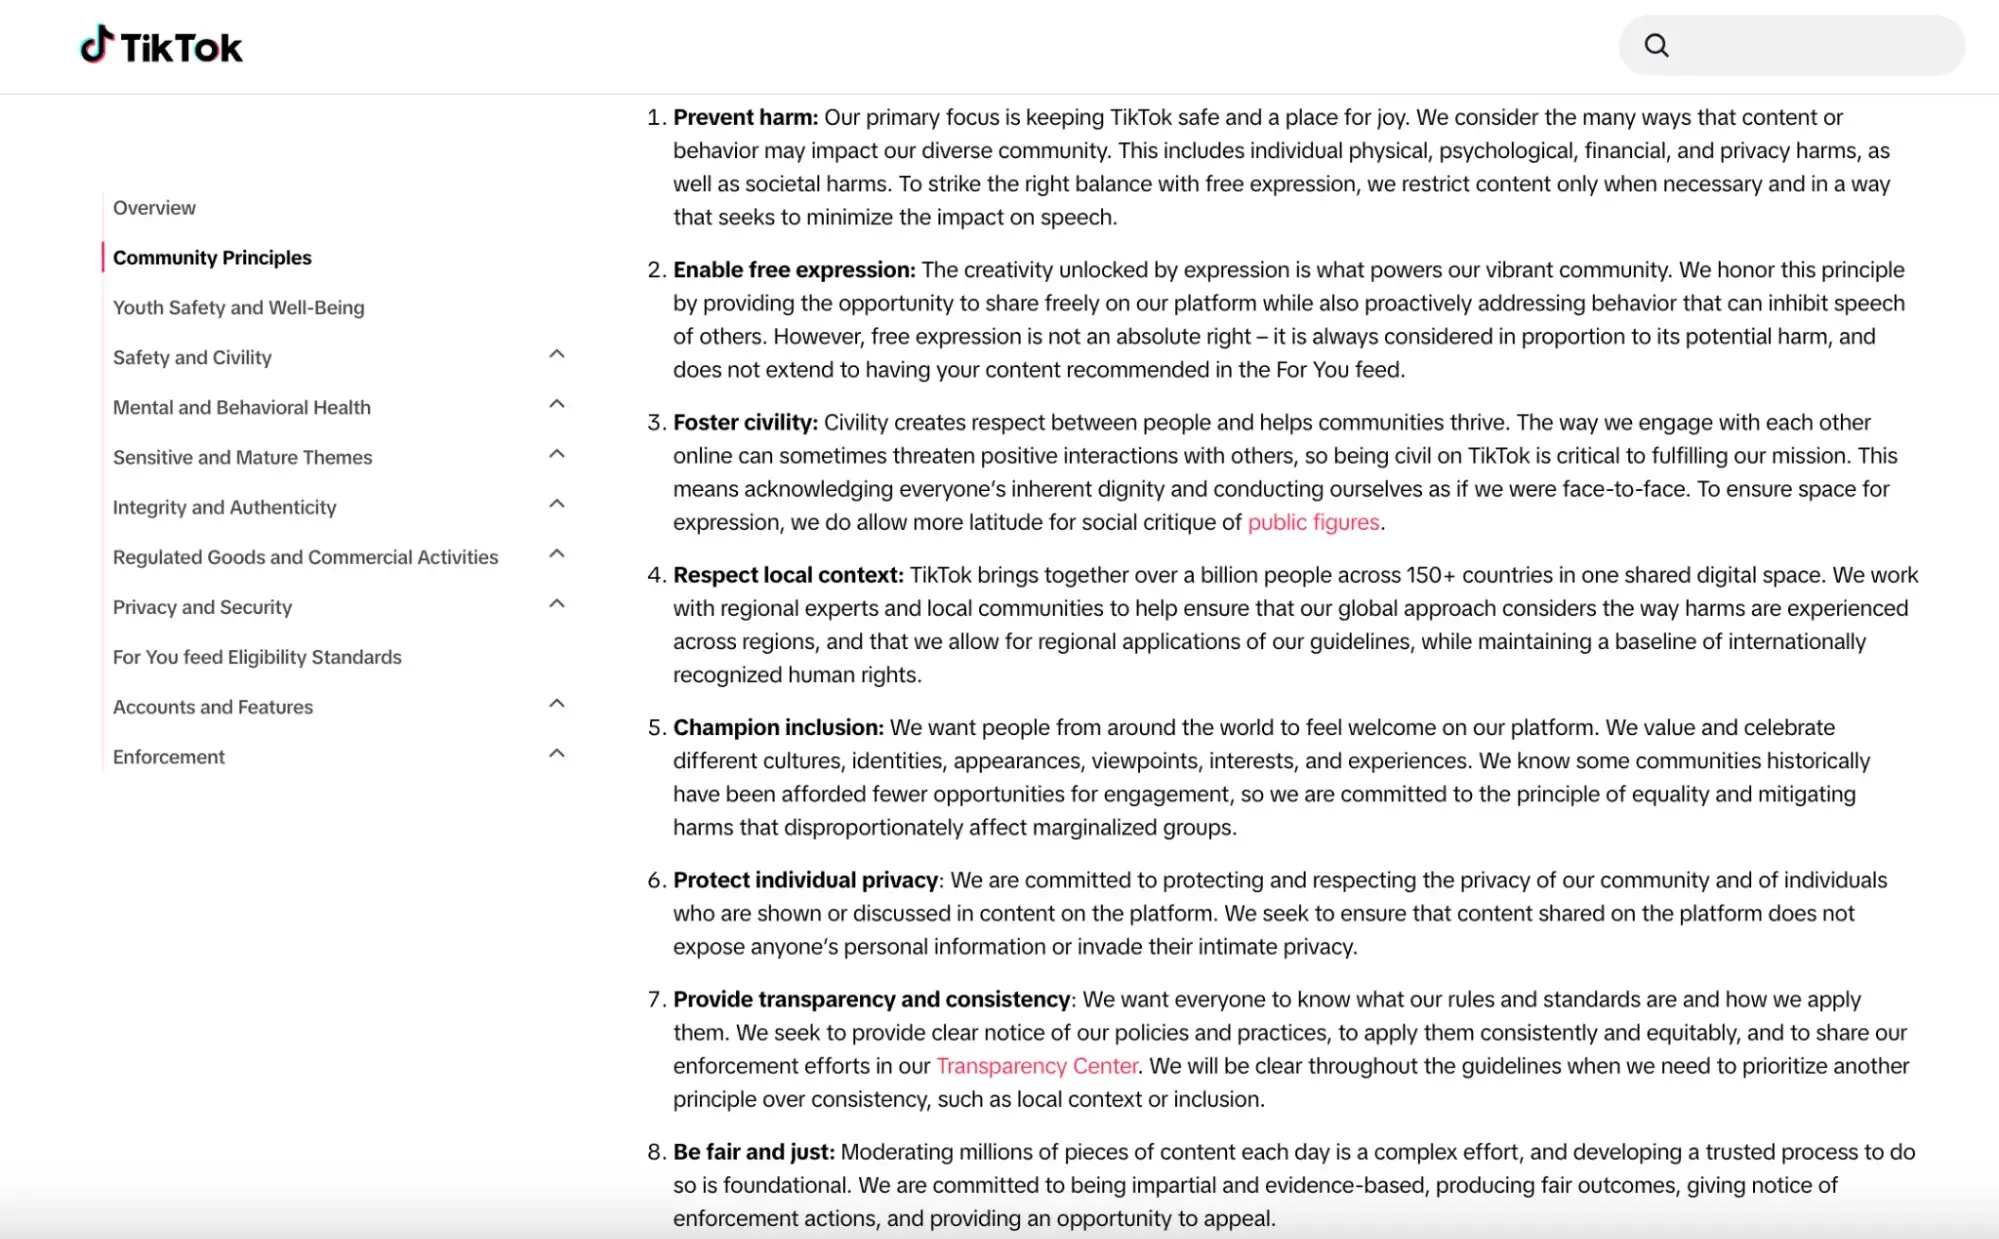 community management best practices, TikTok Community Guidelines example, prevent harm, enable free expression, foster civility, respect local context, champion inclusion, protect individual privacy, provide transparency and consistency, be fair and just 